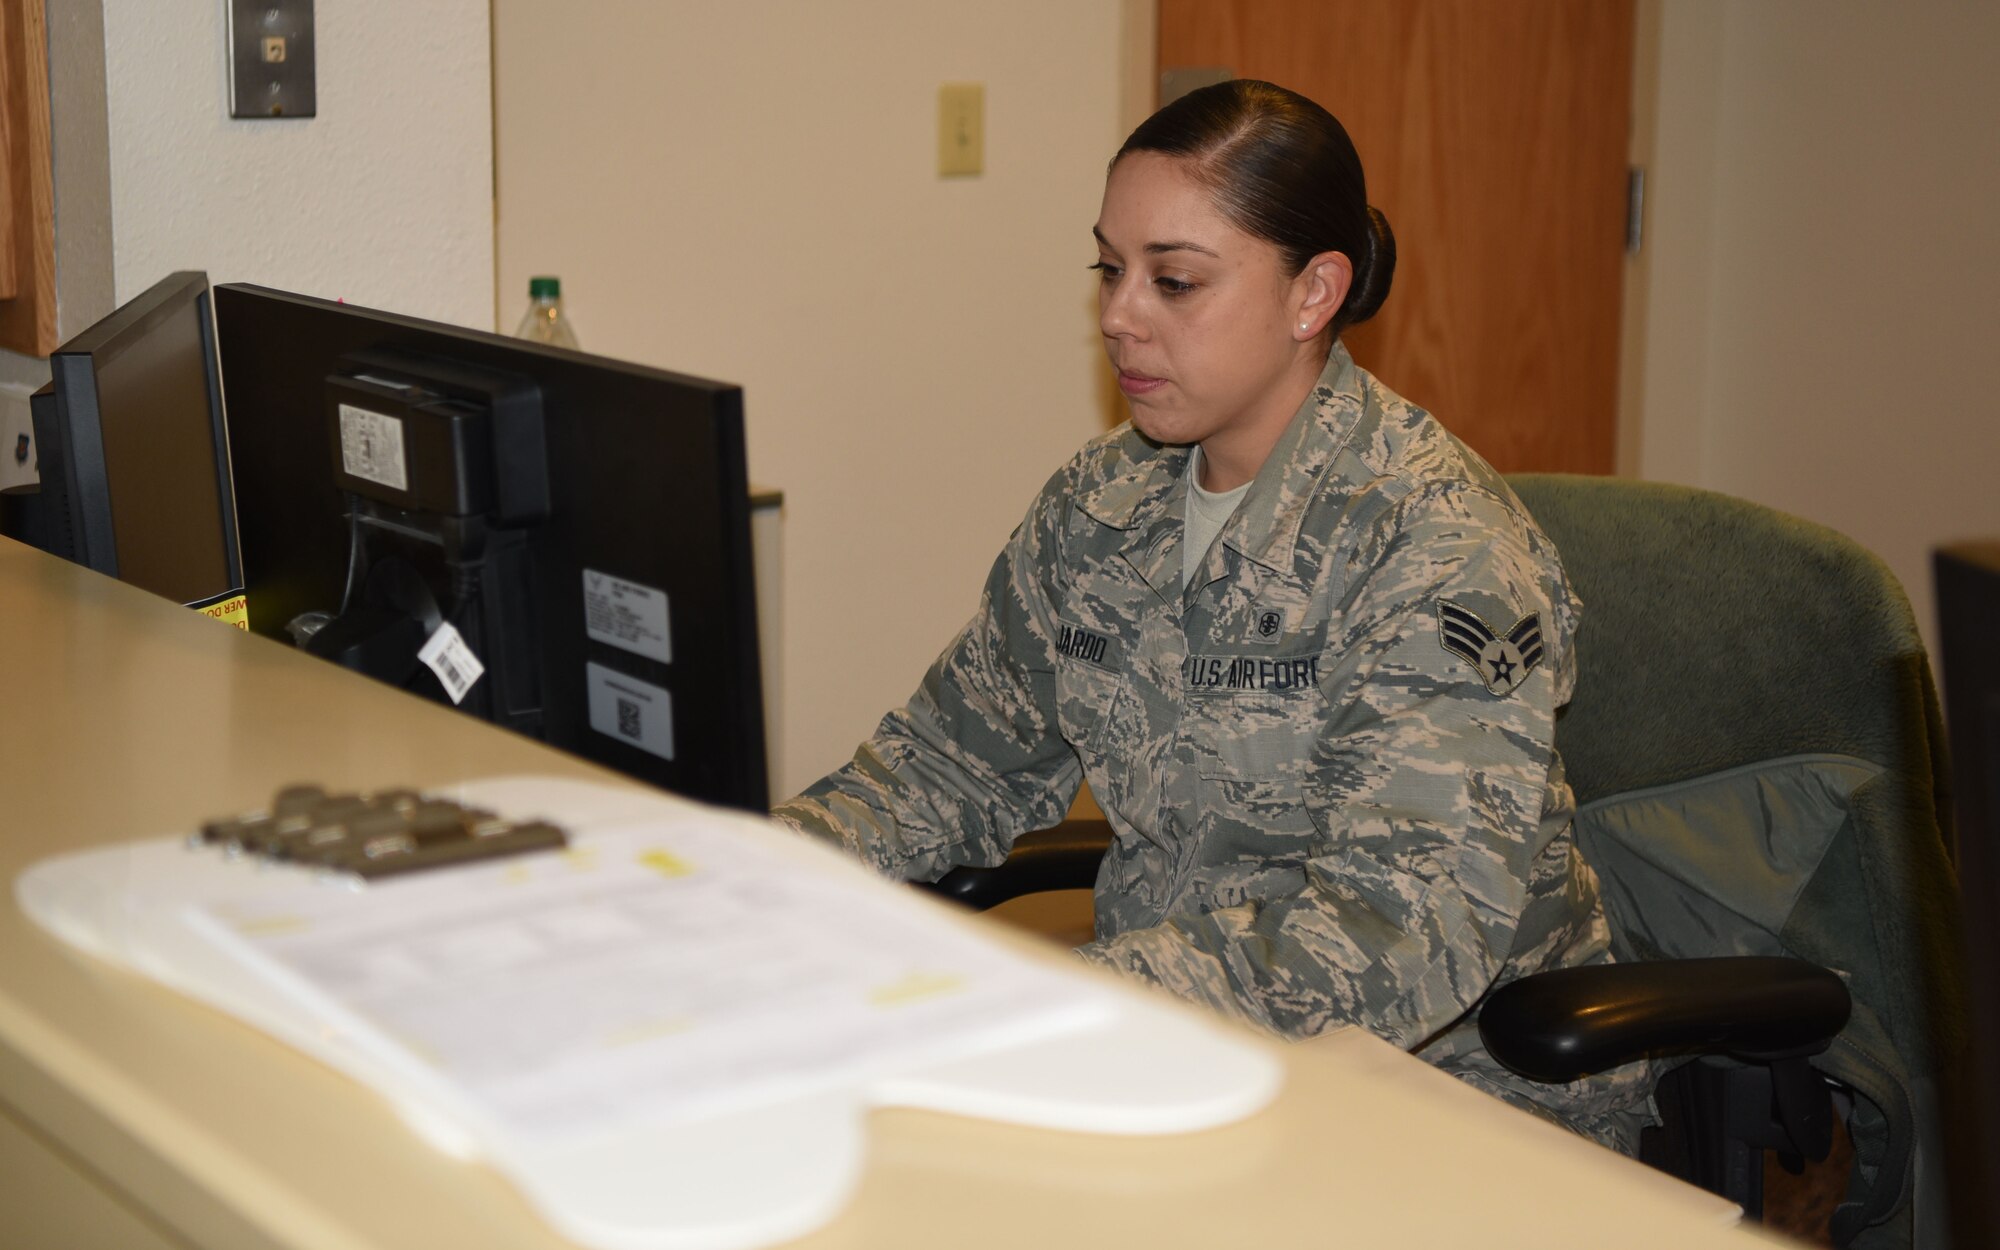 Senior Airman Isabel Guajardo, 90th Medical Group dental assistant, works at the front desk of the dental clinic at F.E. Warren Air Force Base, Wyo., on Dec. 15, 2017. Isabel and her husband work together in the clinic and have proven it is possible to pursue success together at home and work.